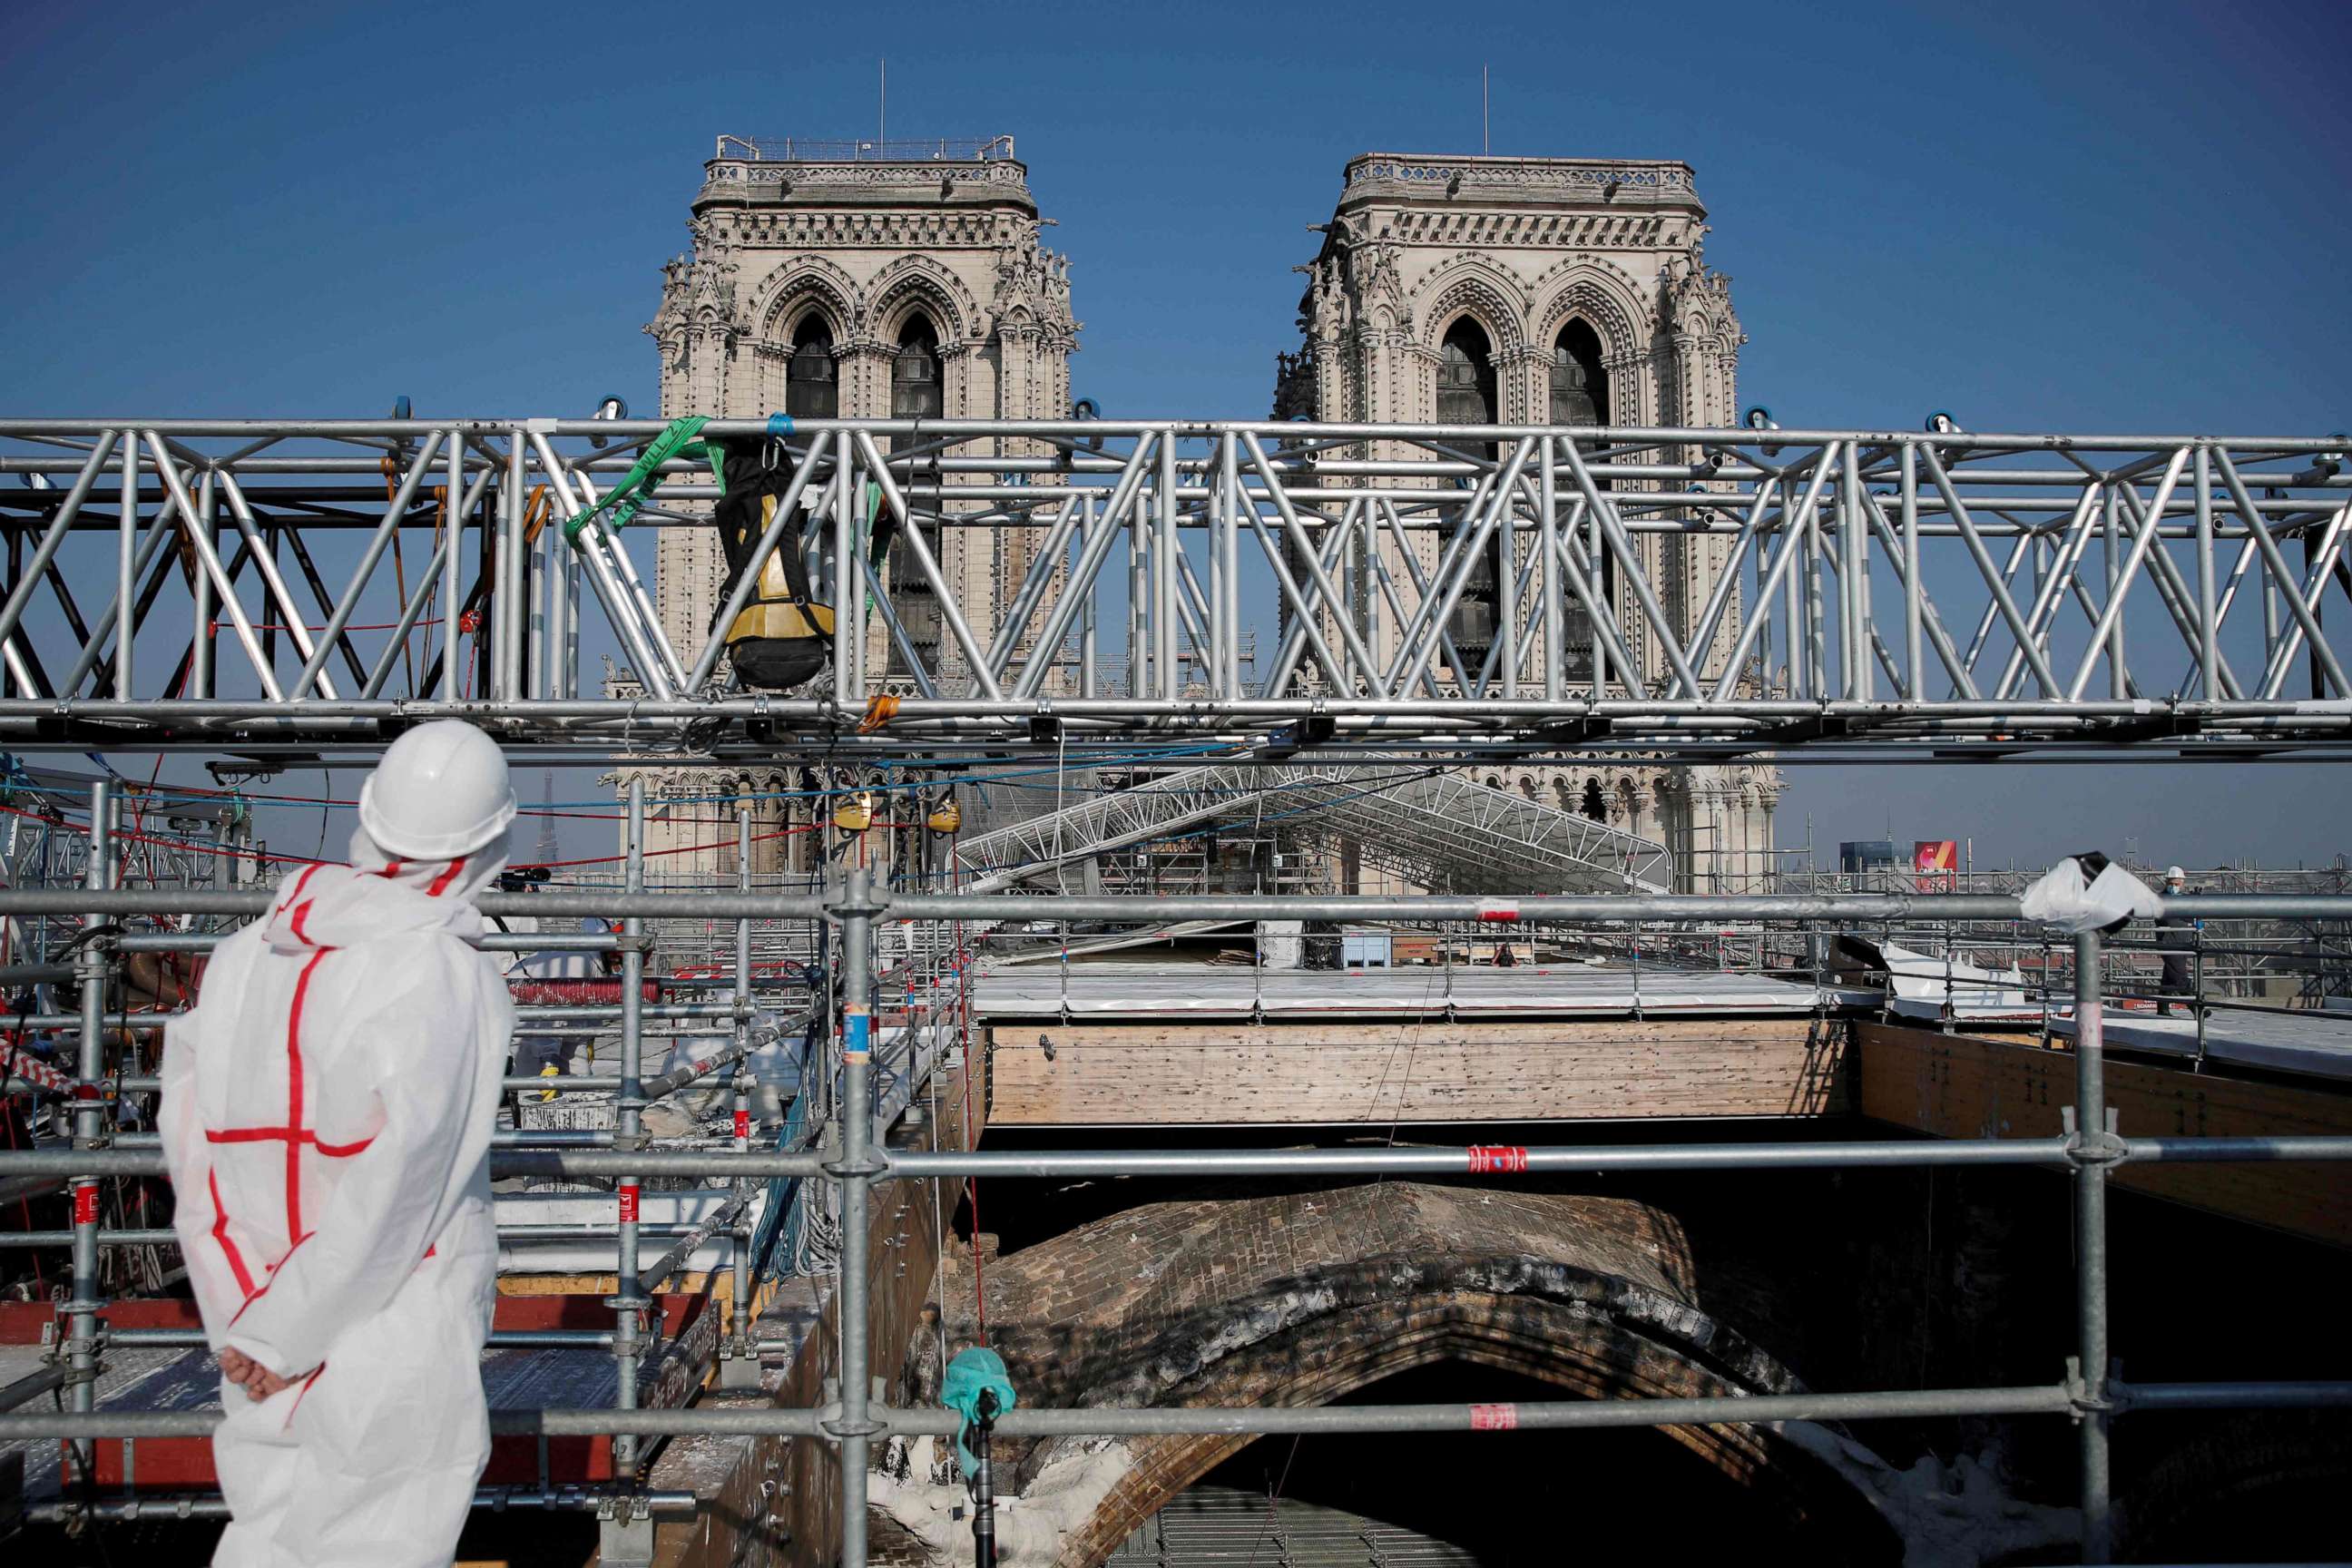 PHOTO: A person stands on the roof of the Notre-Dame de Paris Cathedral ahead of a visit of French President two years after the blaze that made the spire collapsed and destroyed much of the roof, in Paris on April 15, 2021.